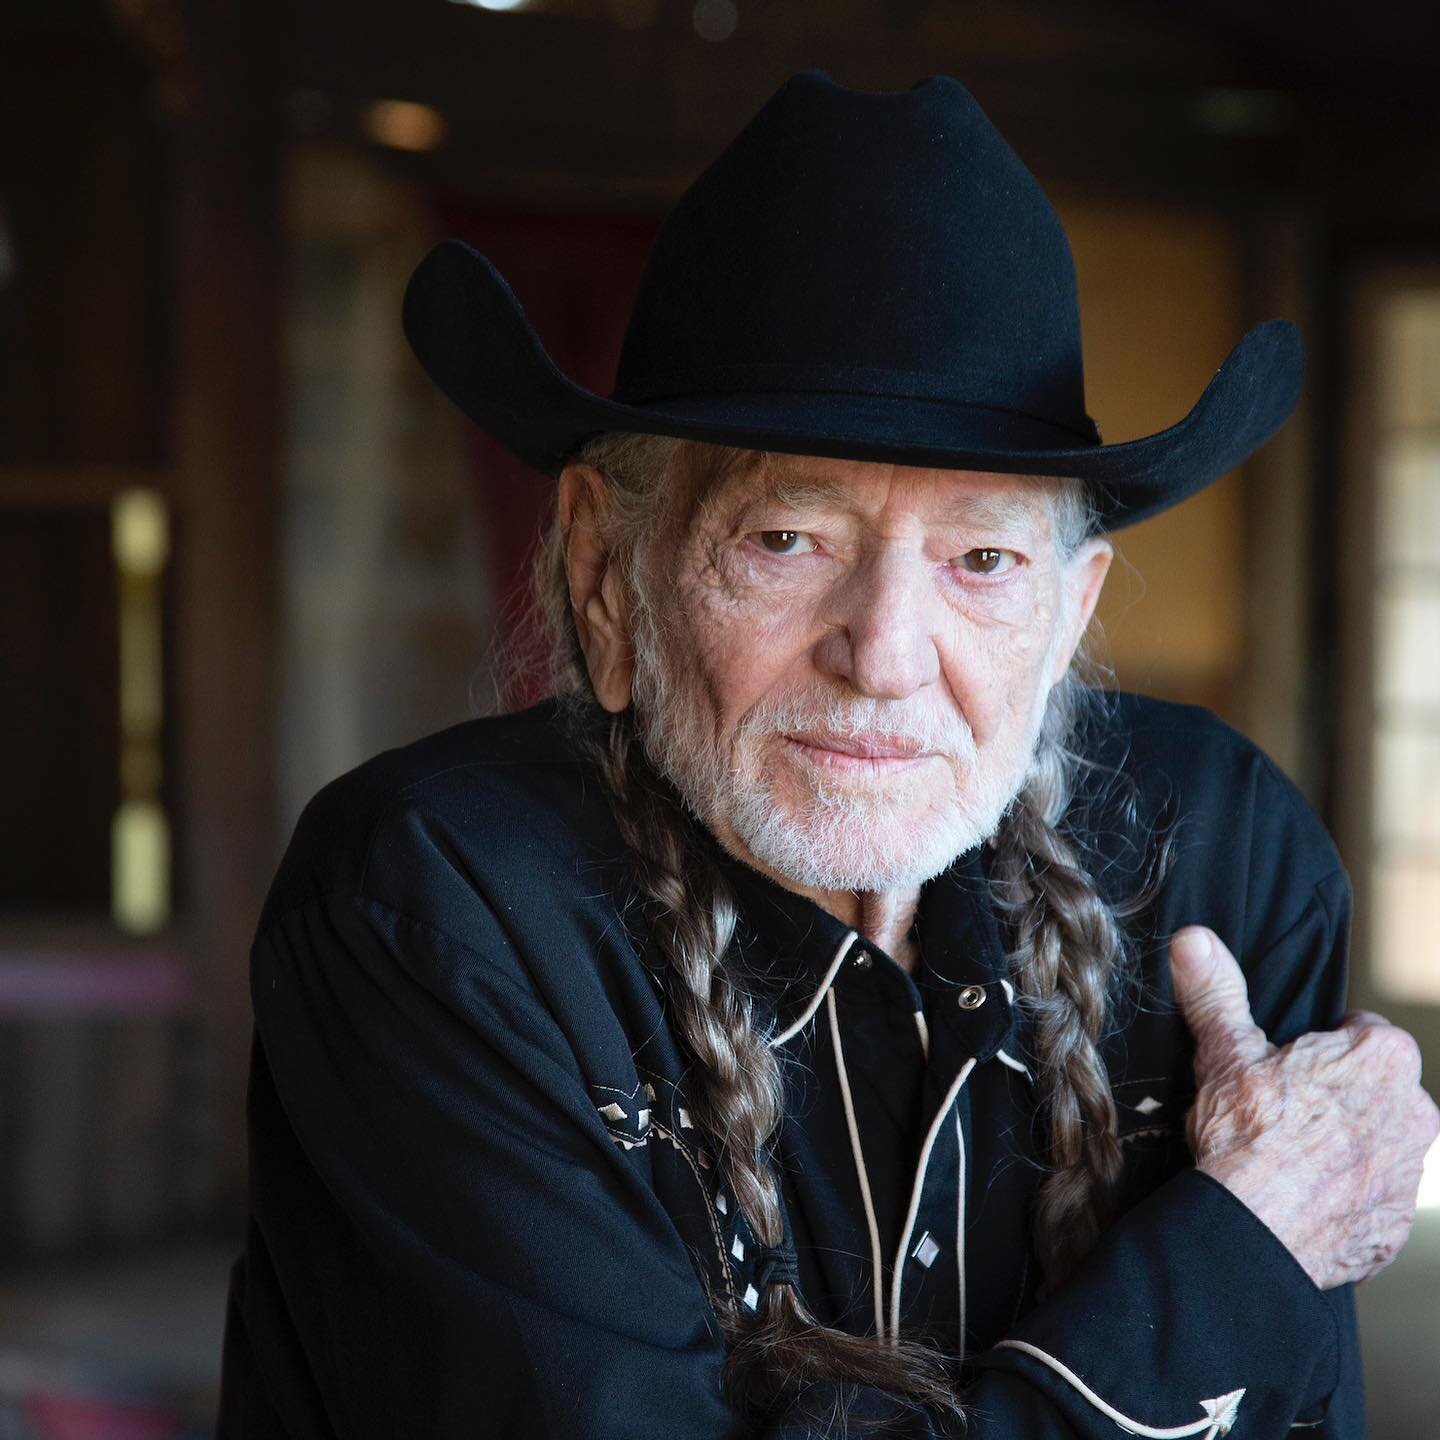 Honoured to be opening for Willie Nelson in support of @FarmAid on March 15 at &quot;Three Sisters Potluck,&quot; with a family-style seated dinner prepared by a diverse slate of esteemed chefs under the hill country stars at Willie Nelson's ranch in